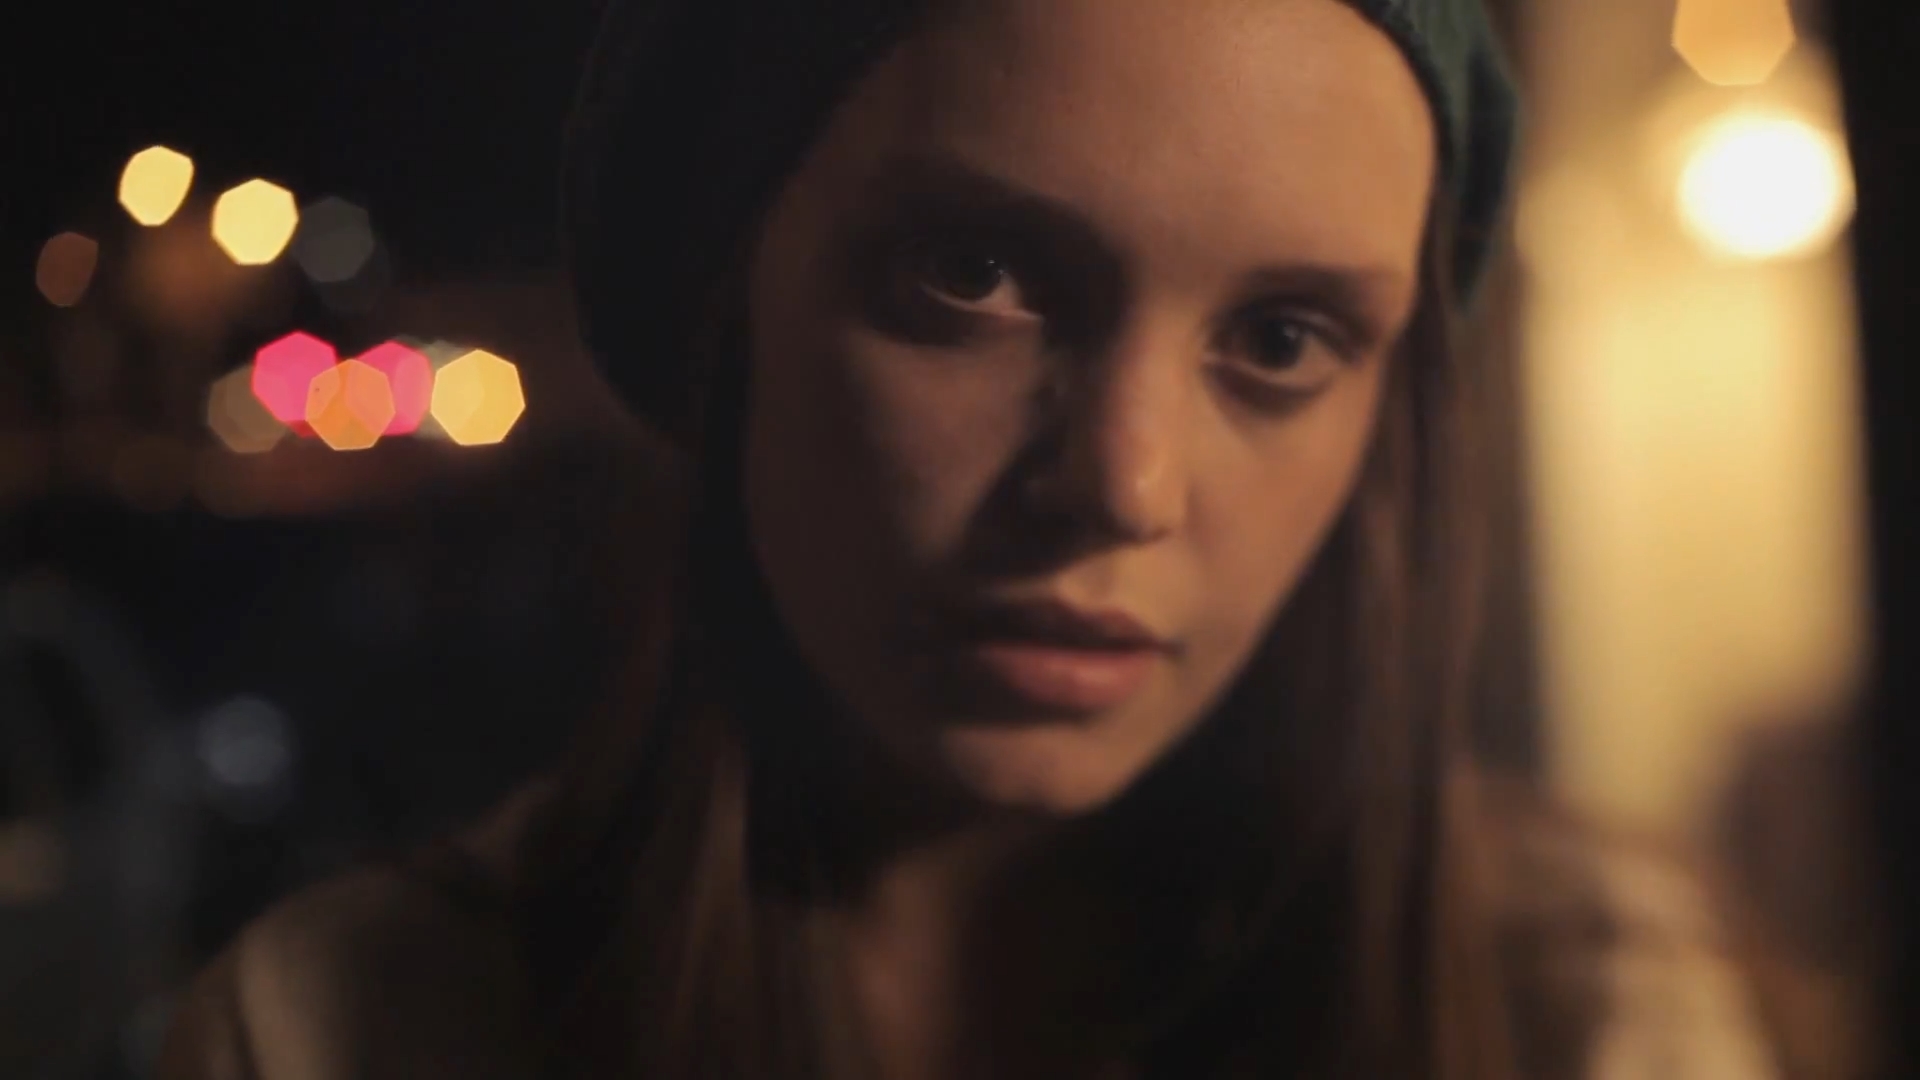 Still from 1 minute student film: 'I'm sorry I hurt you' - Written and directed by Frankie Stromberg